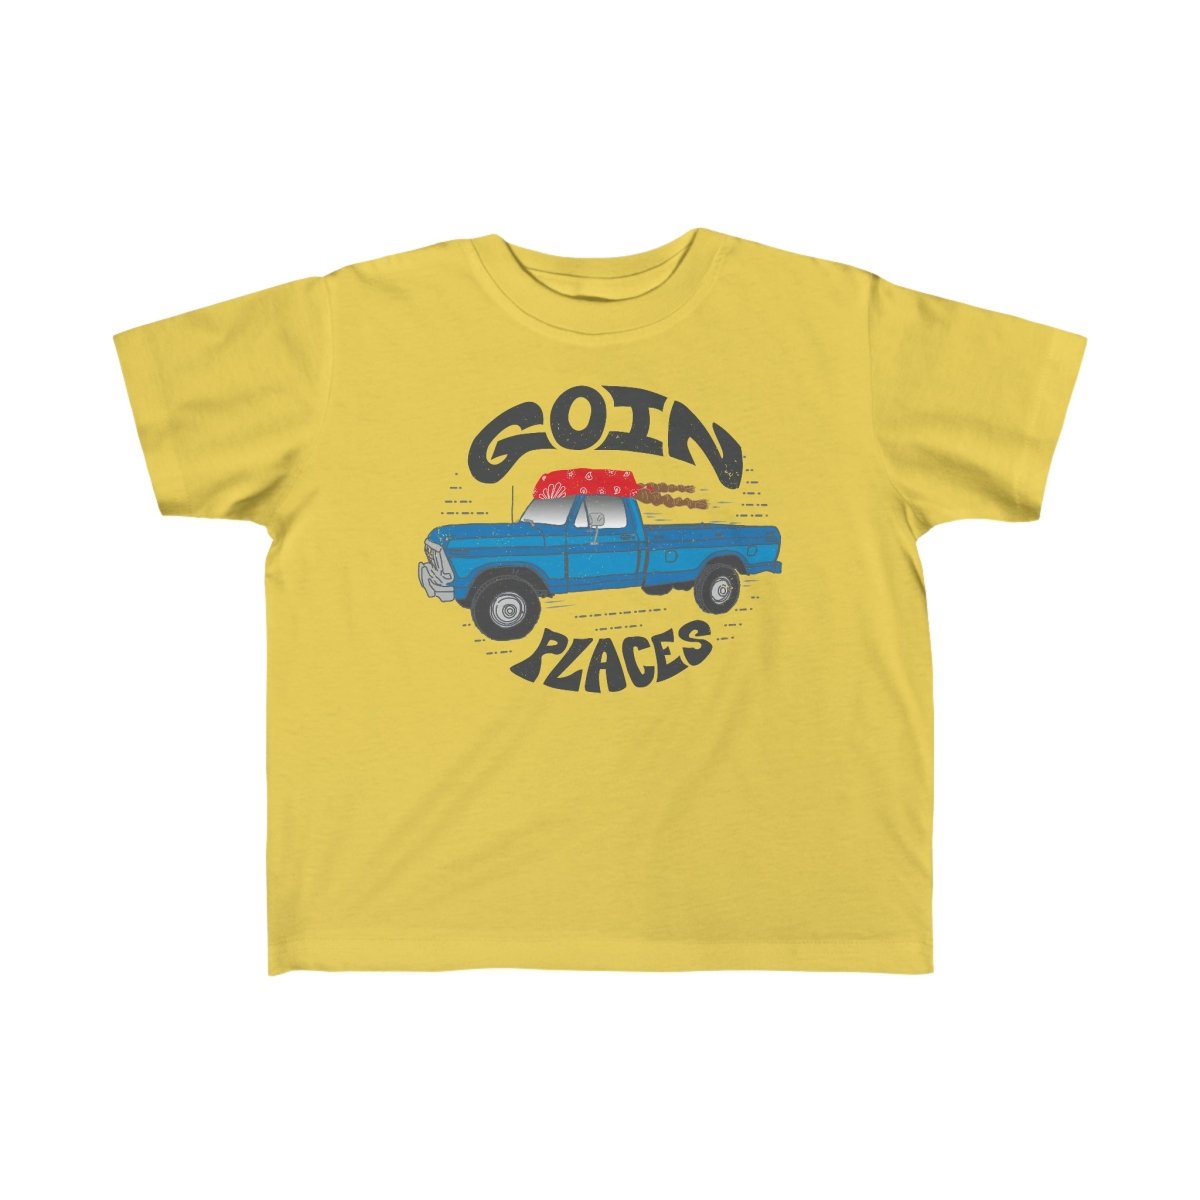 Goin Places Toddler T-Shirt, Family Travel Vacation, Road Gypsy